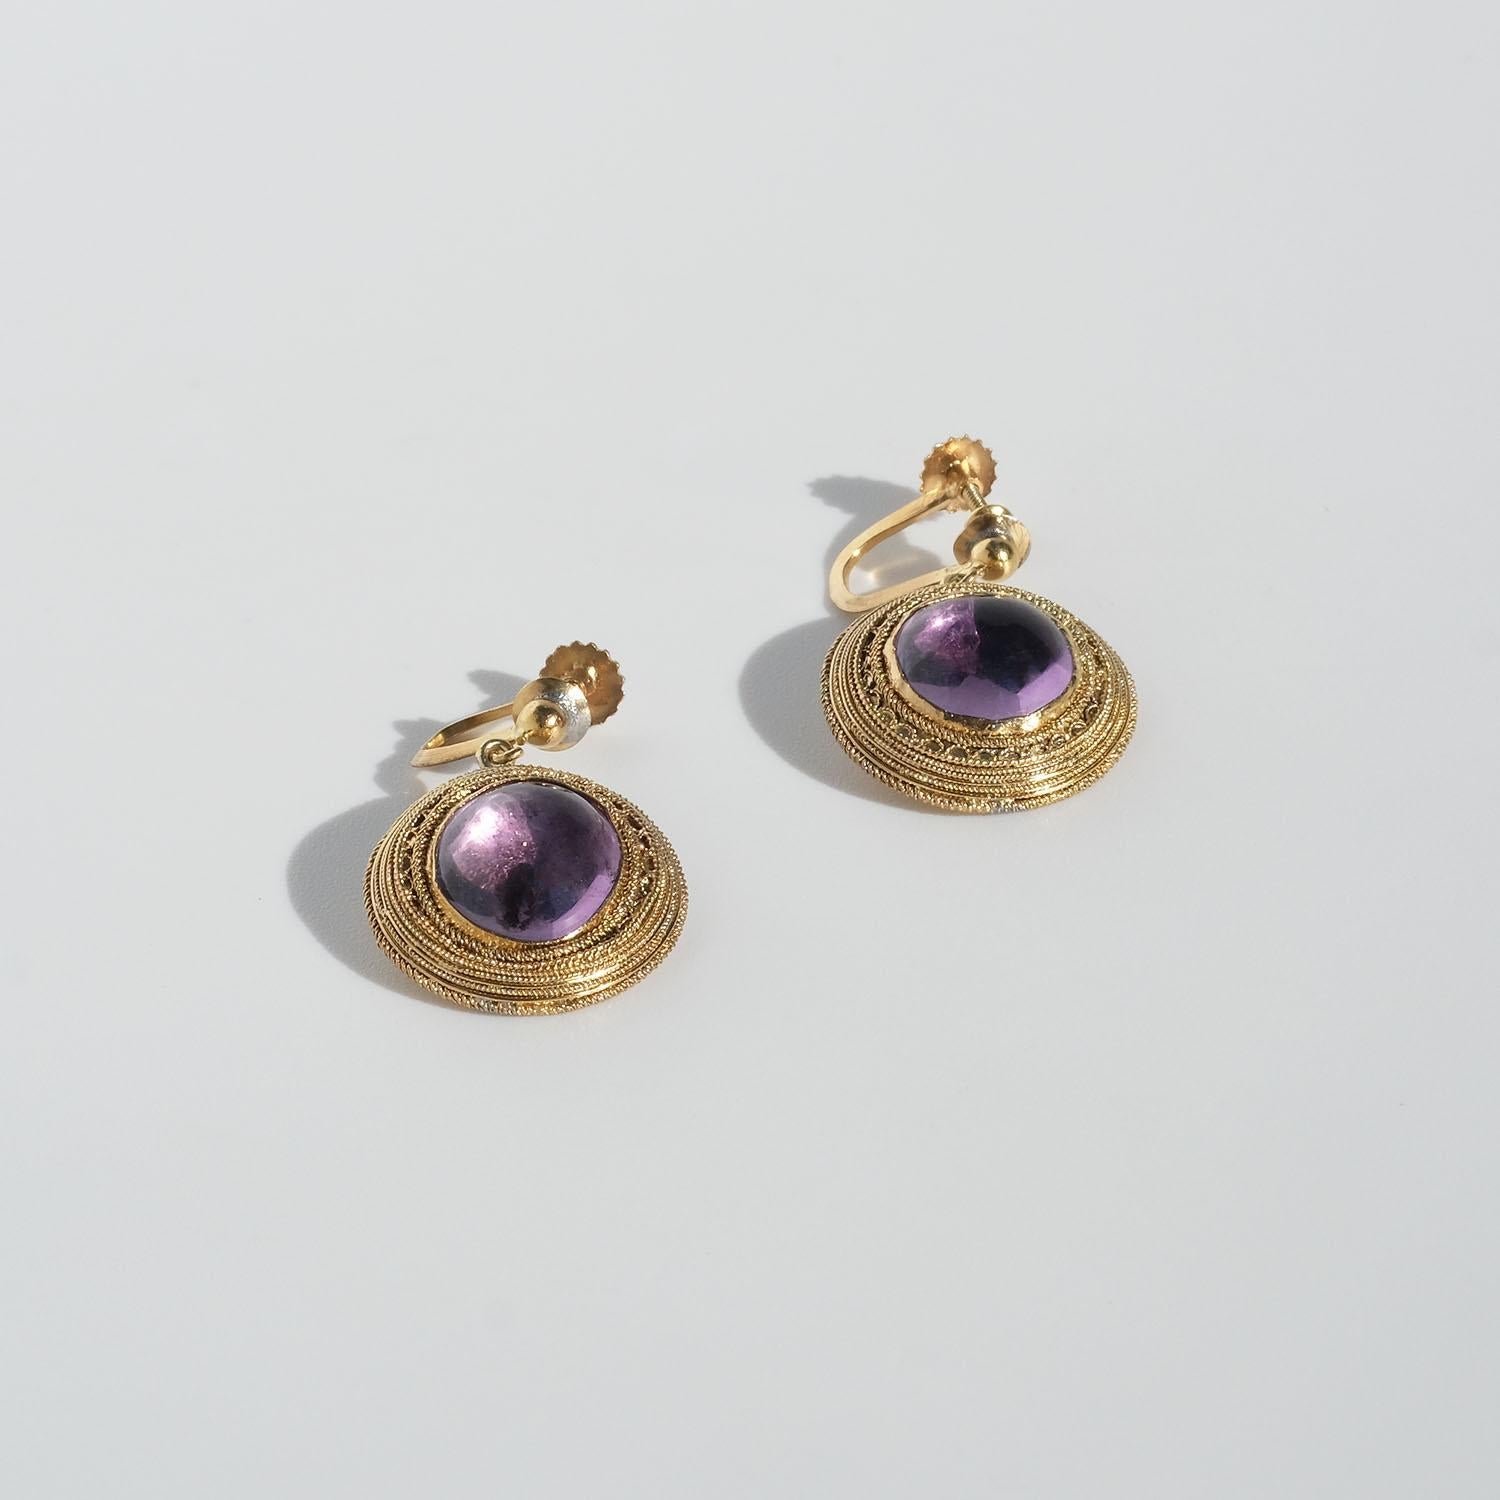 Cabochon Antique earrings. Gilded silver and amethysts. For Sale